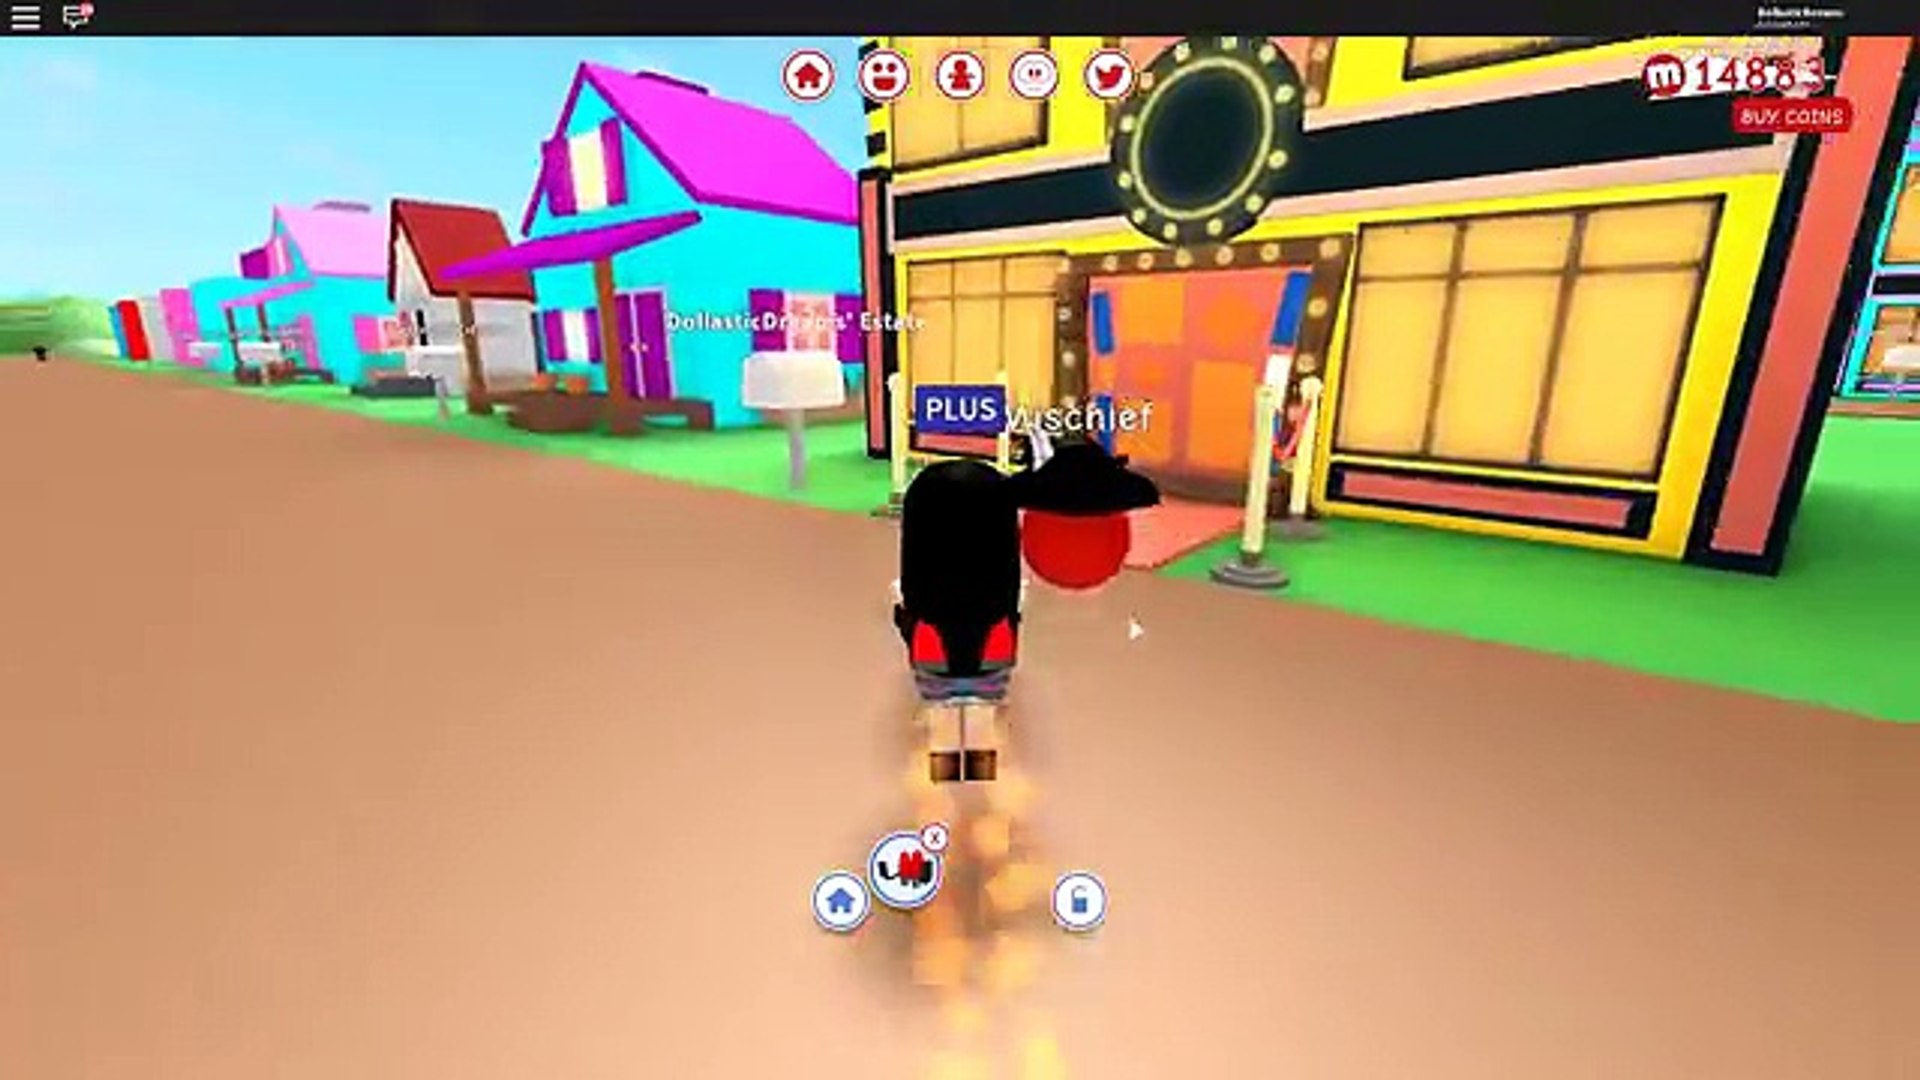 Lastic Goes Shopping Splurging New Meep Toys Jet Pack Roblox Meepcity Dollastic Plays Dailymotion Video - how to start a party in roblox meep city